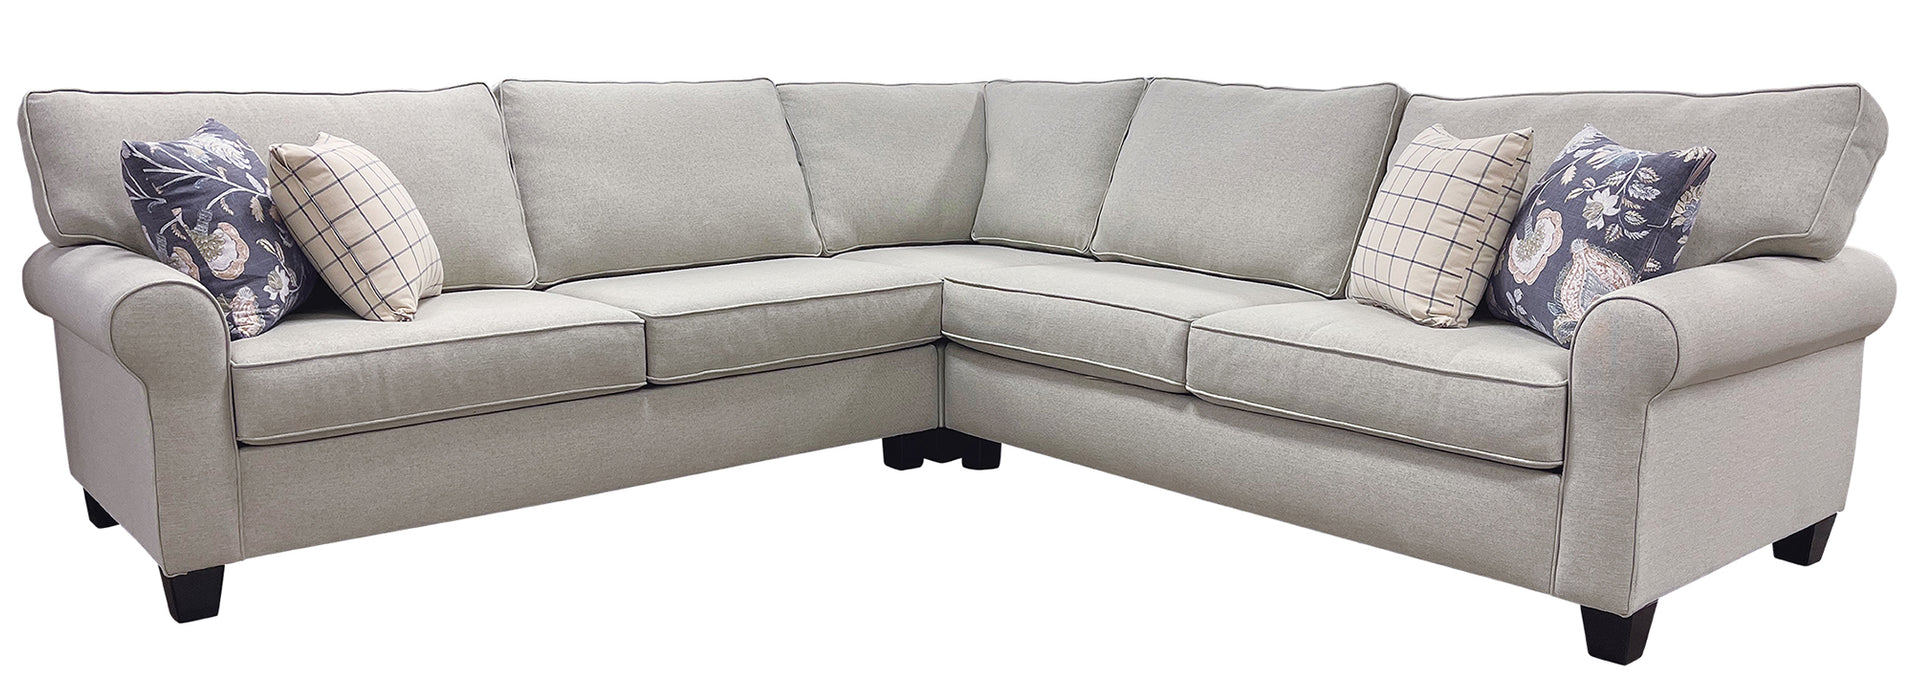 Mariano Italian Leather Furniture - Charlotte Sectional in Bronte Graphite - 1004-30L-30R - GreatFurnitureDeal